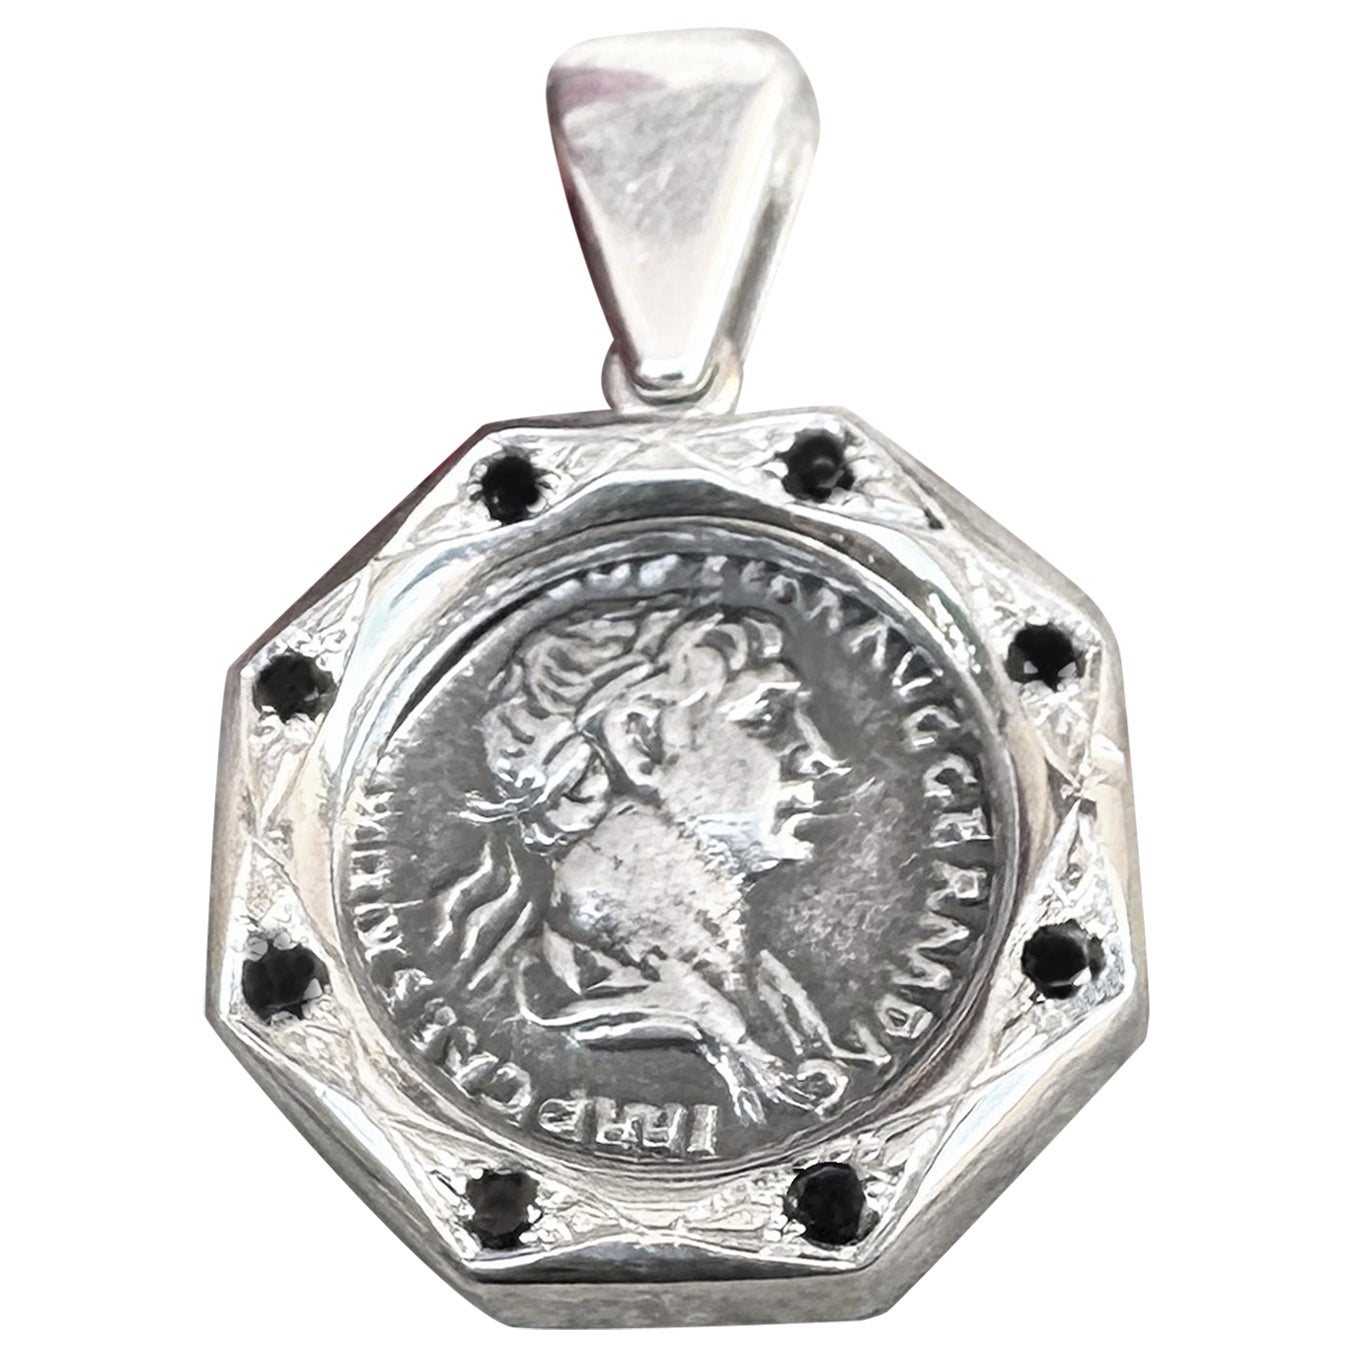 This exquisite silver pendant showcases a genuine Roman silver denarius coin dating back to the 2nd century AD, depicting Emperor Trajan on its front and God Mars on the reverse. Accentuating its allure, the pendant is embellished with 8 black